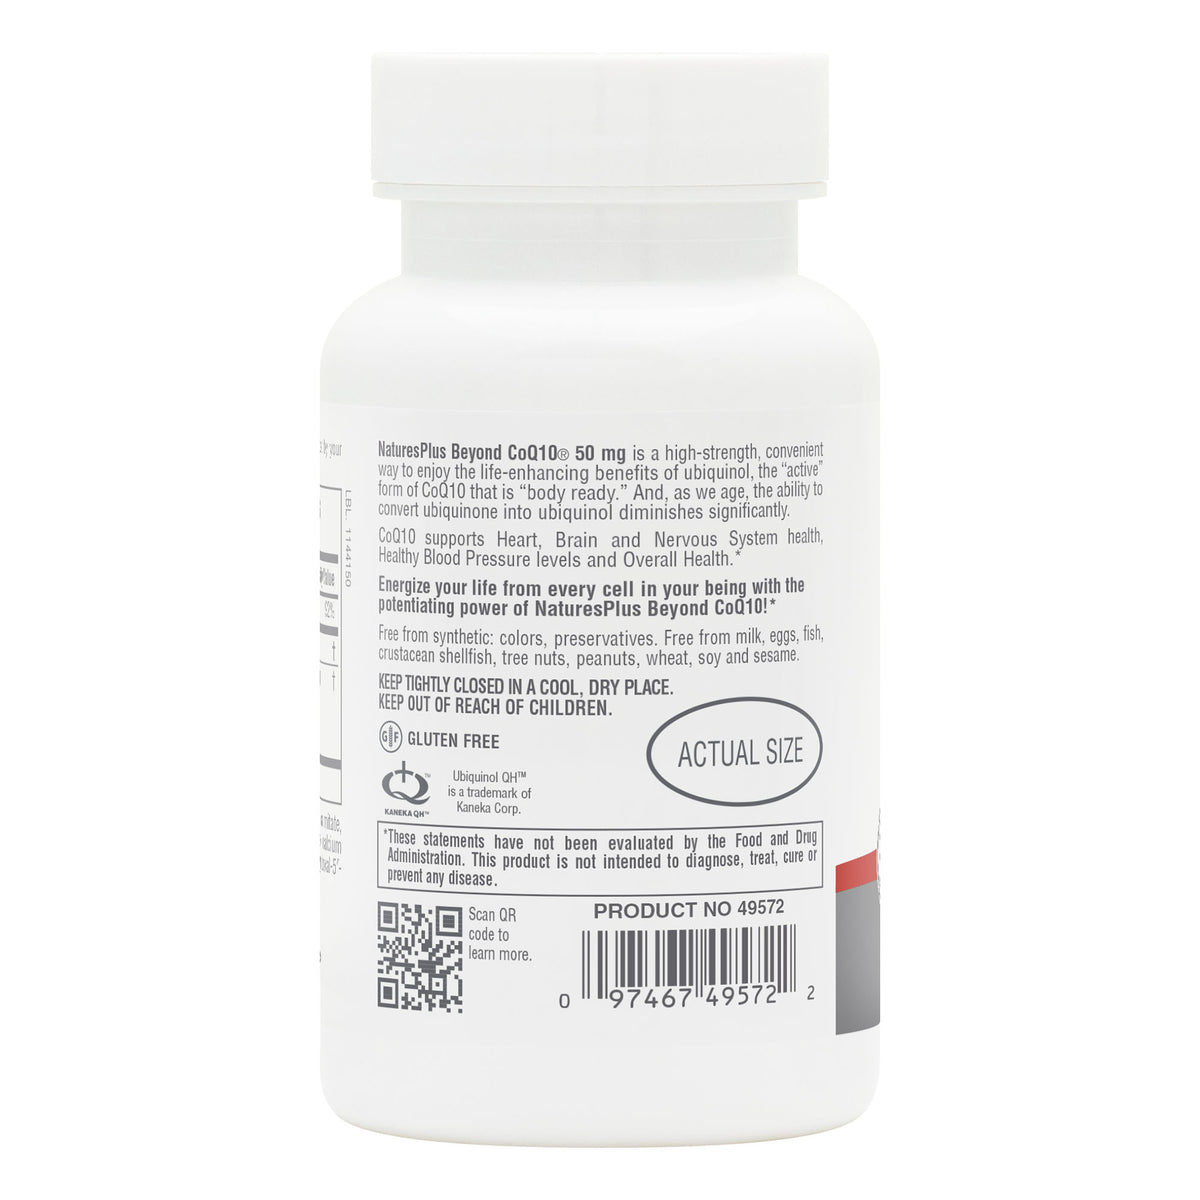 product image of Beyond CoQ10® 50 mg Softgels containing 30 Count